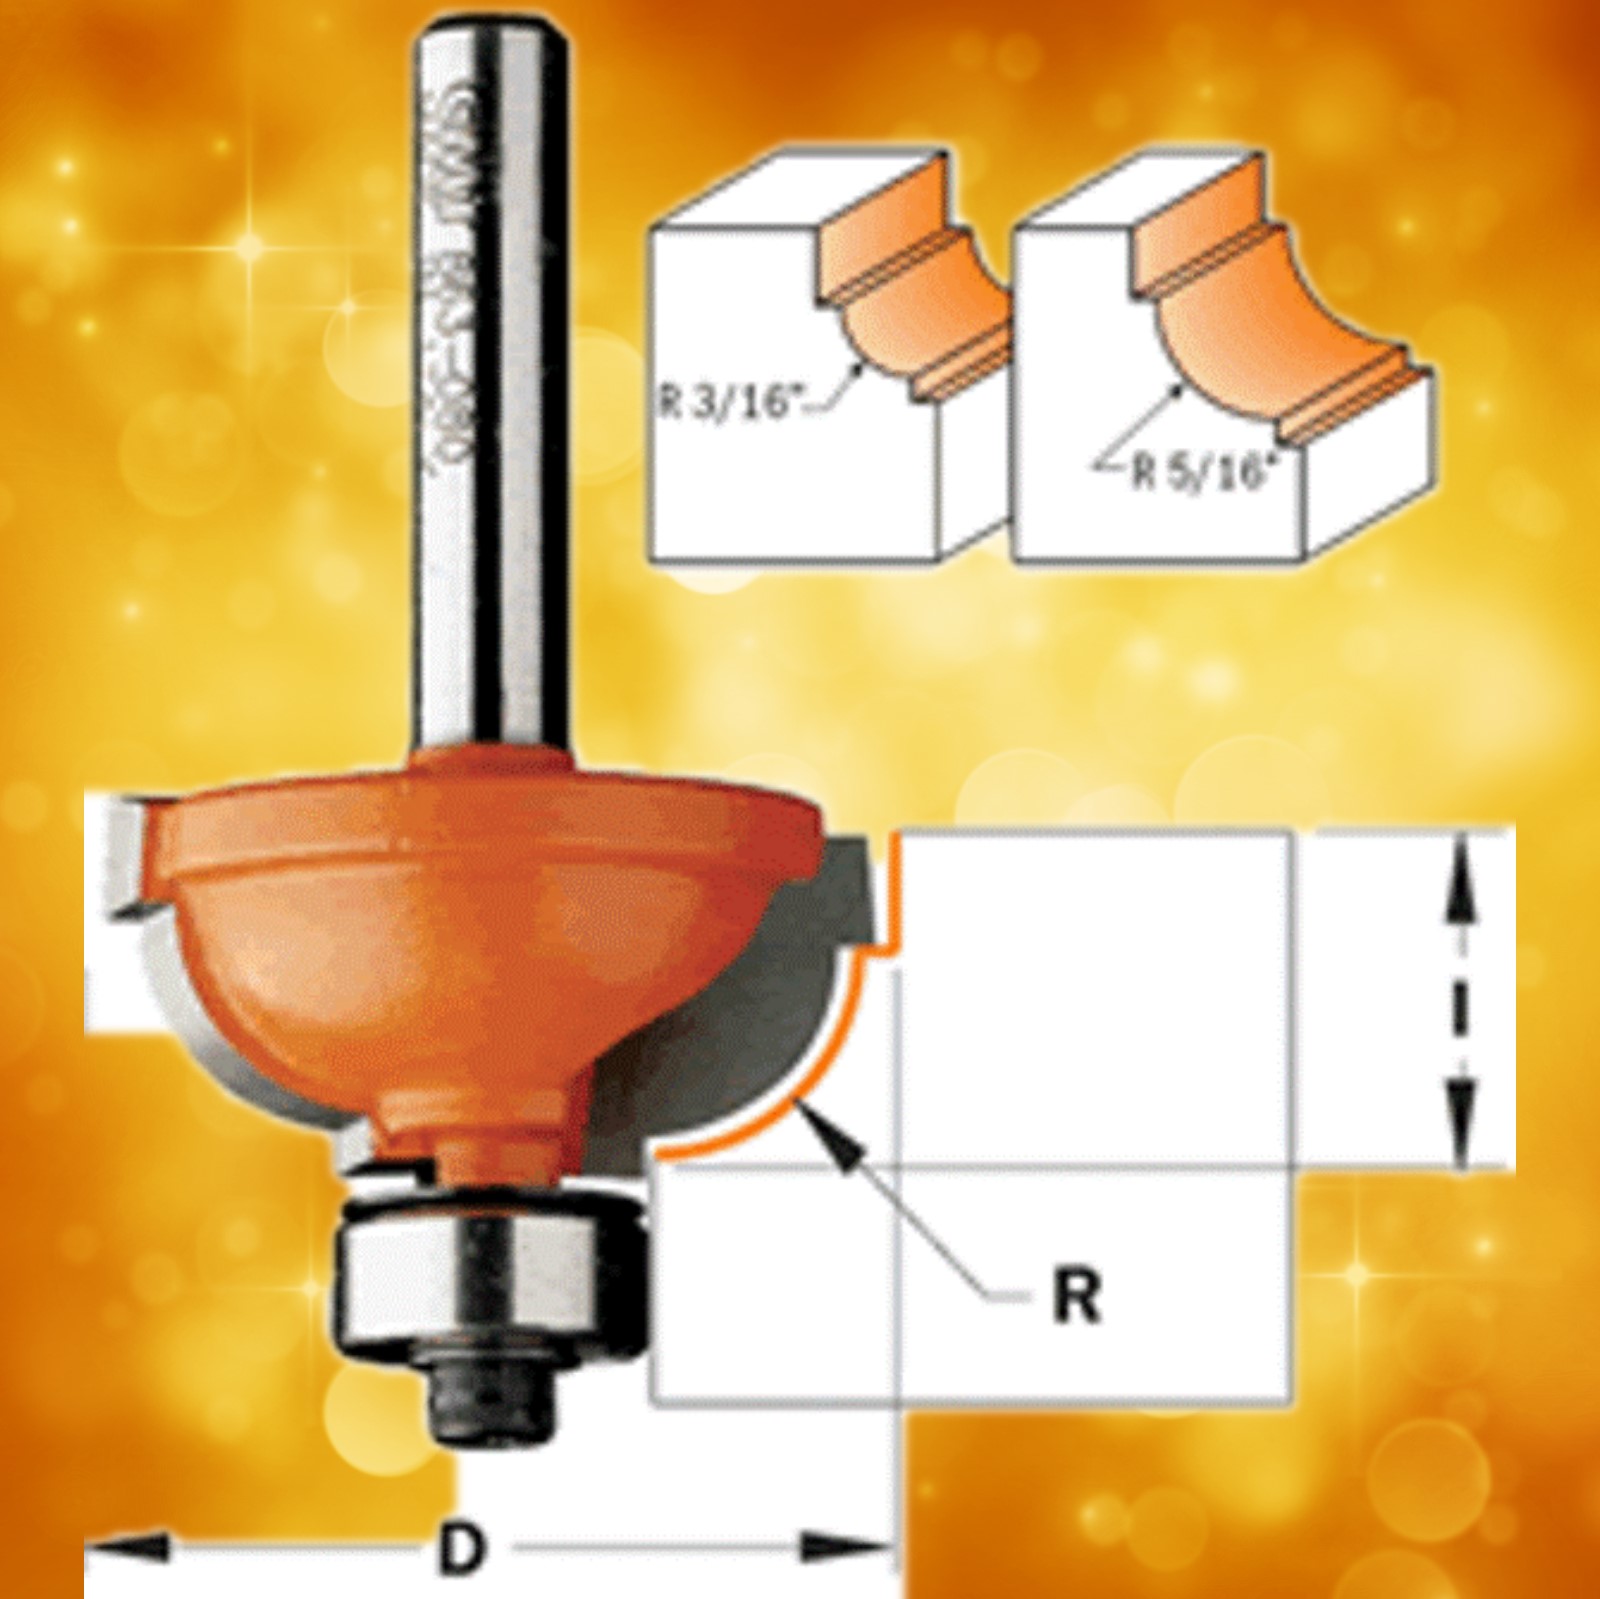 CMT Cavetto Edge Mold Router Bit with Bottom Fillet 864.548.11, 3/16" diameter, 1/2" shank